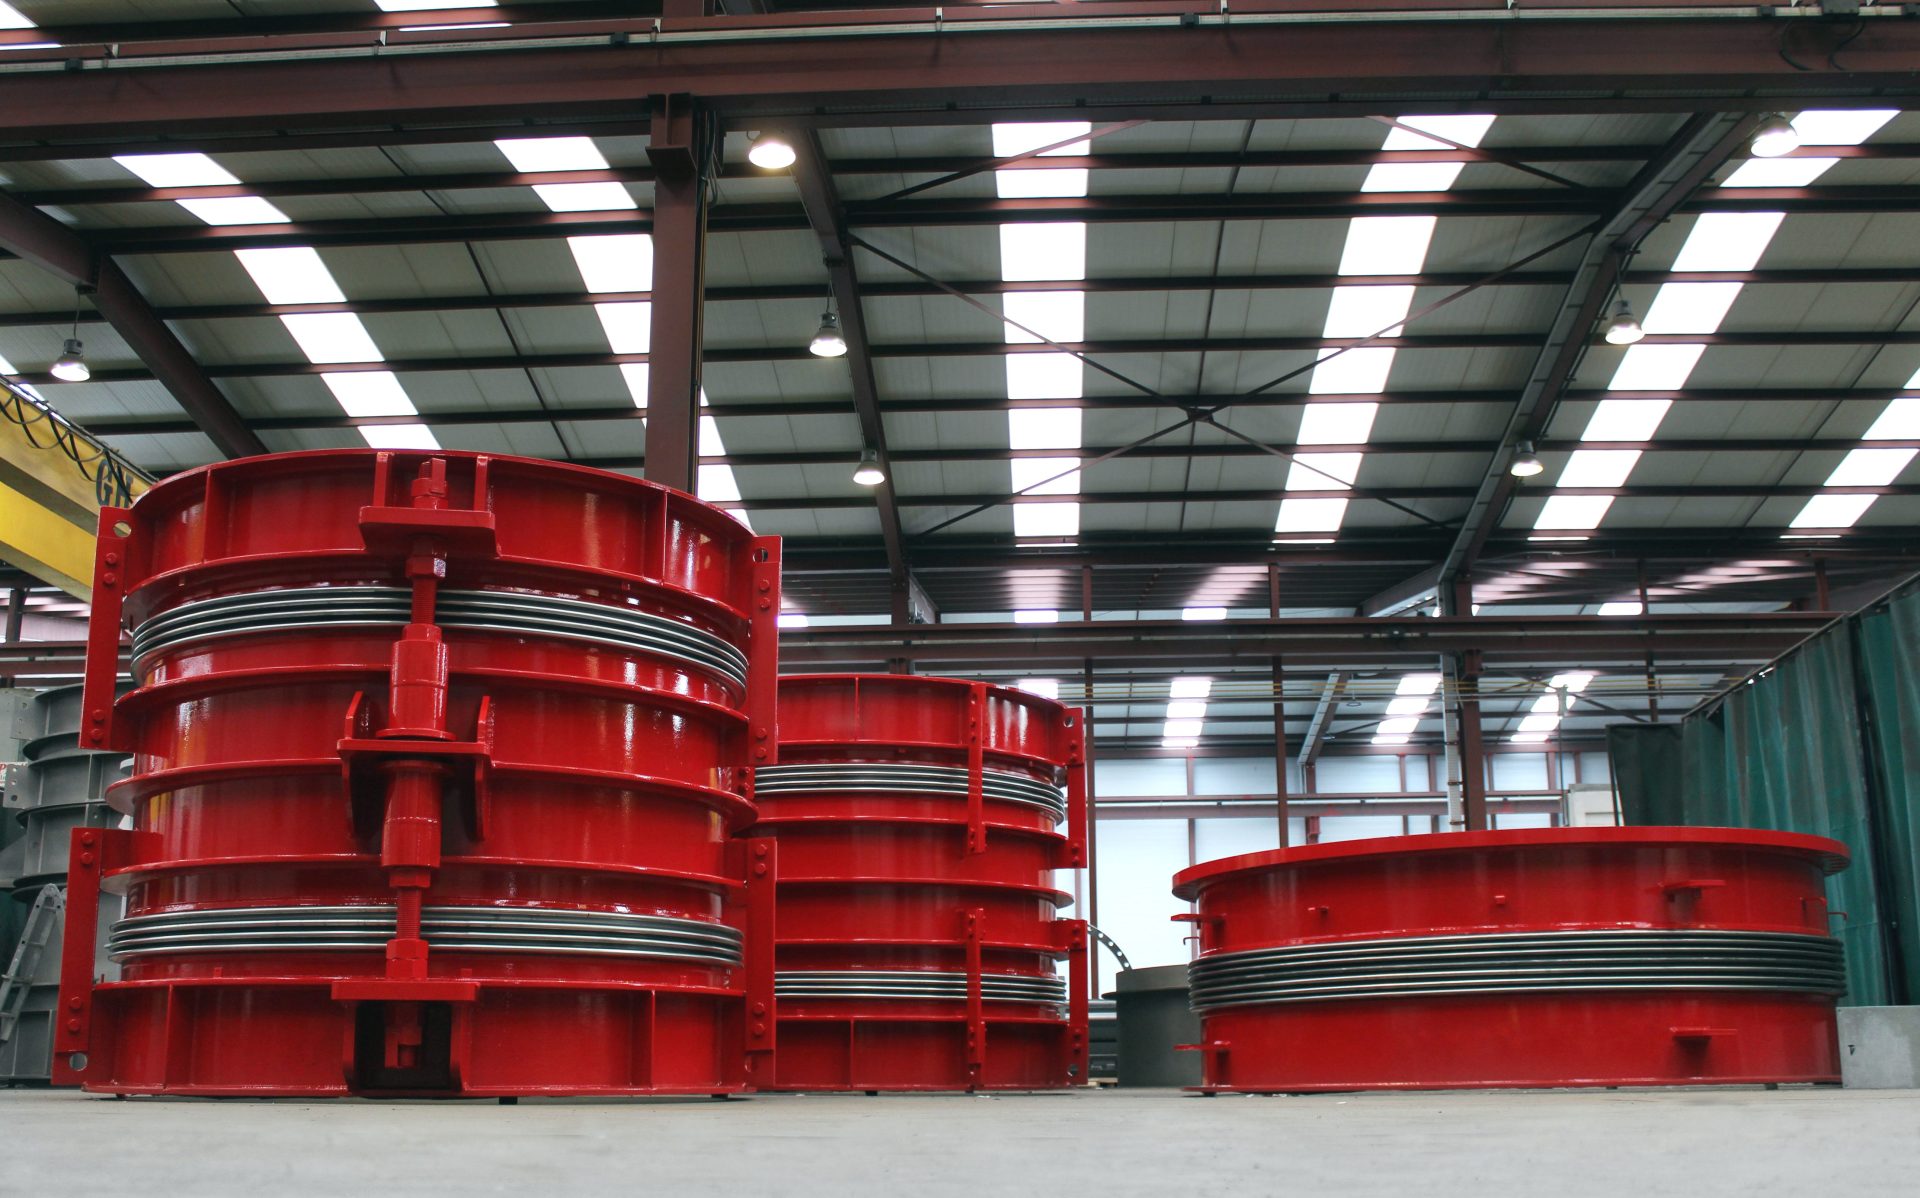 Delivery of Expansion Joints for Biomass Power Plant in Southwestern Europe